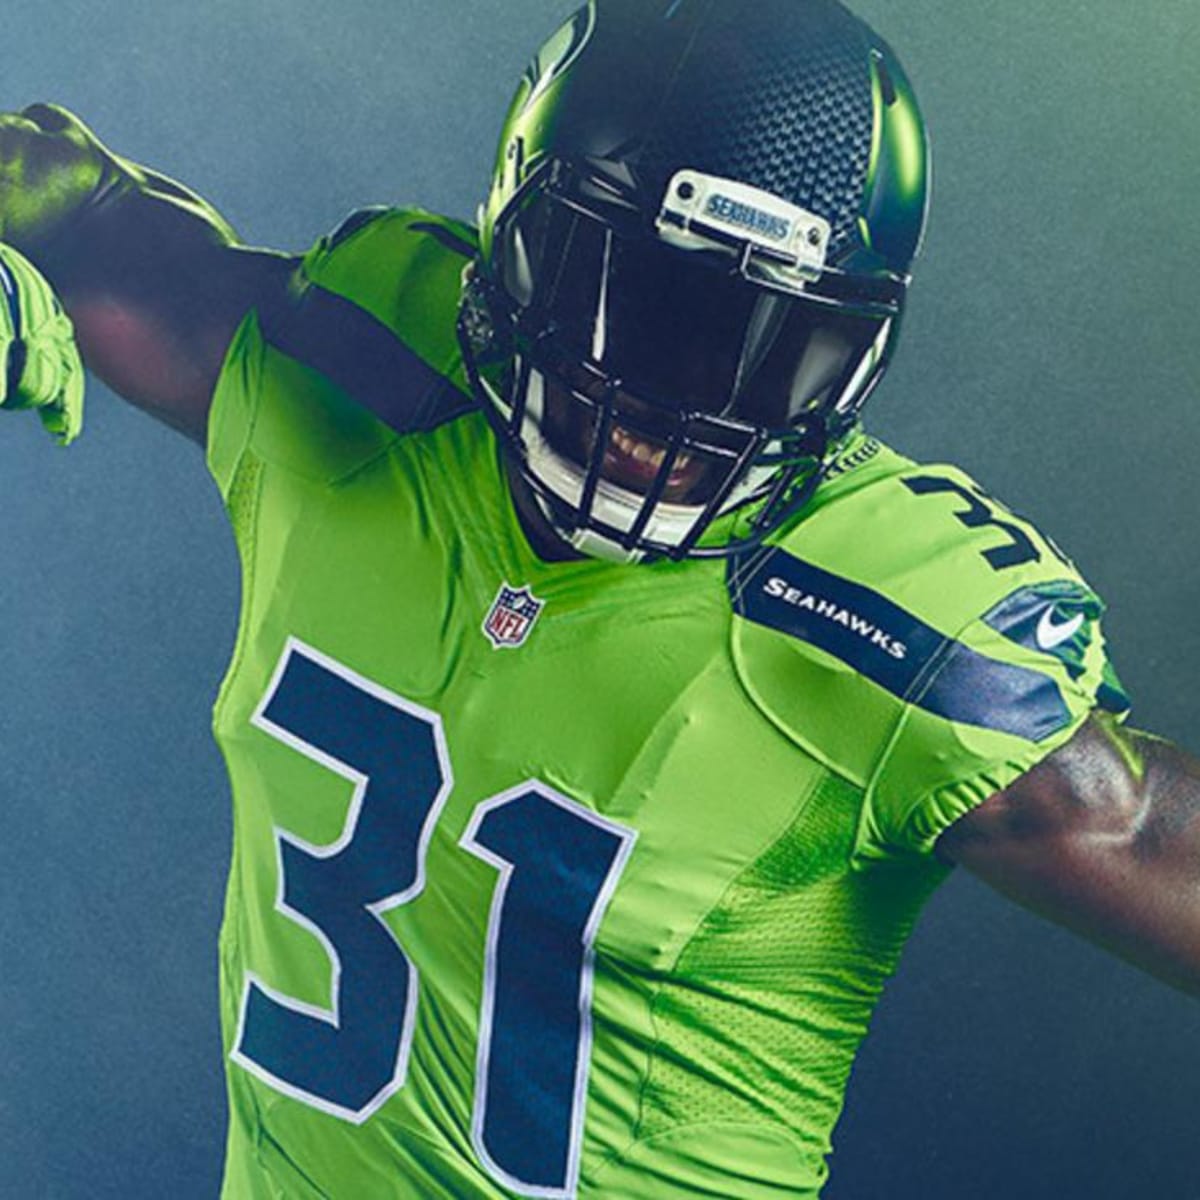 NIKE collab with artists to celebrate NFL color rush uniforms